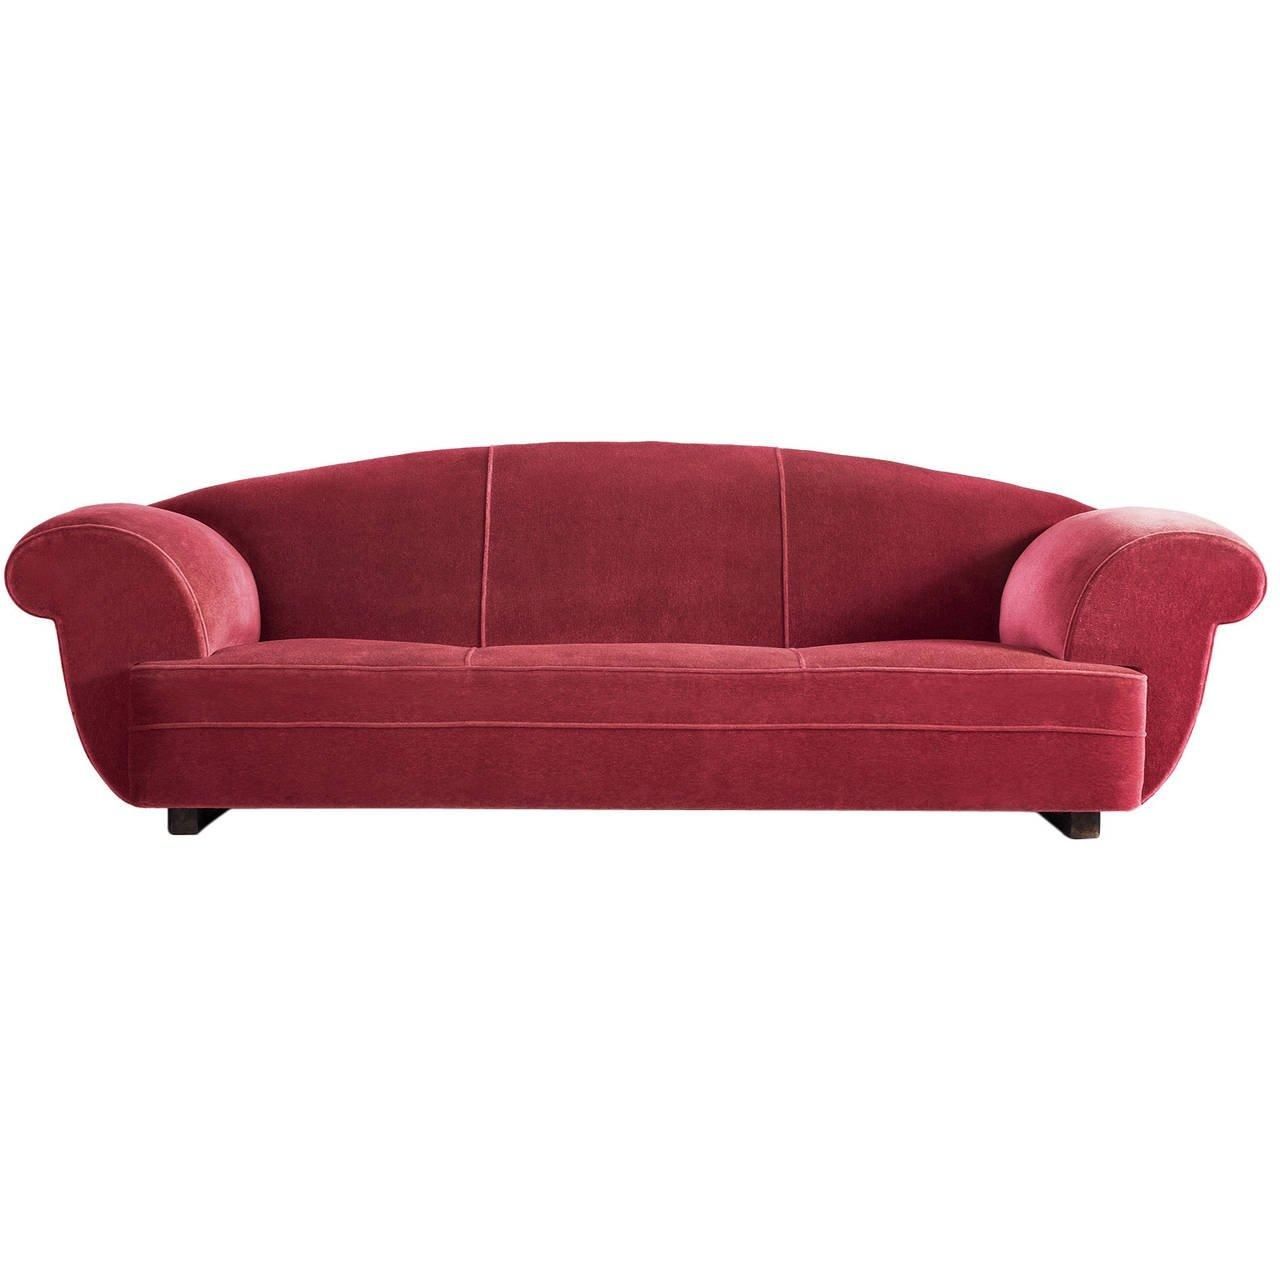 1930s Sofa Images – Reverse Search For 1930s Sofas (View 13 of 20)